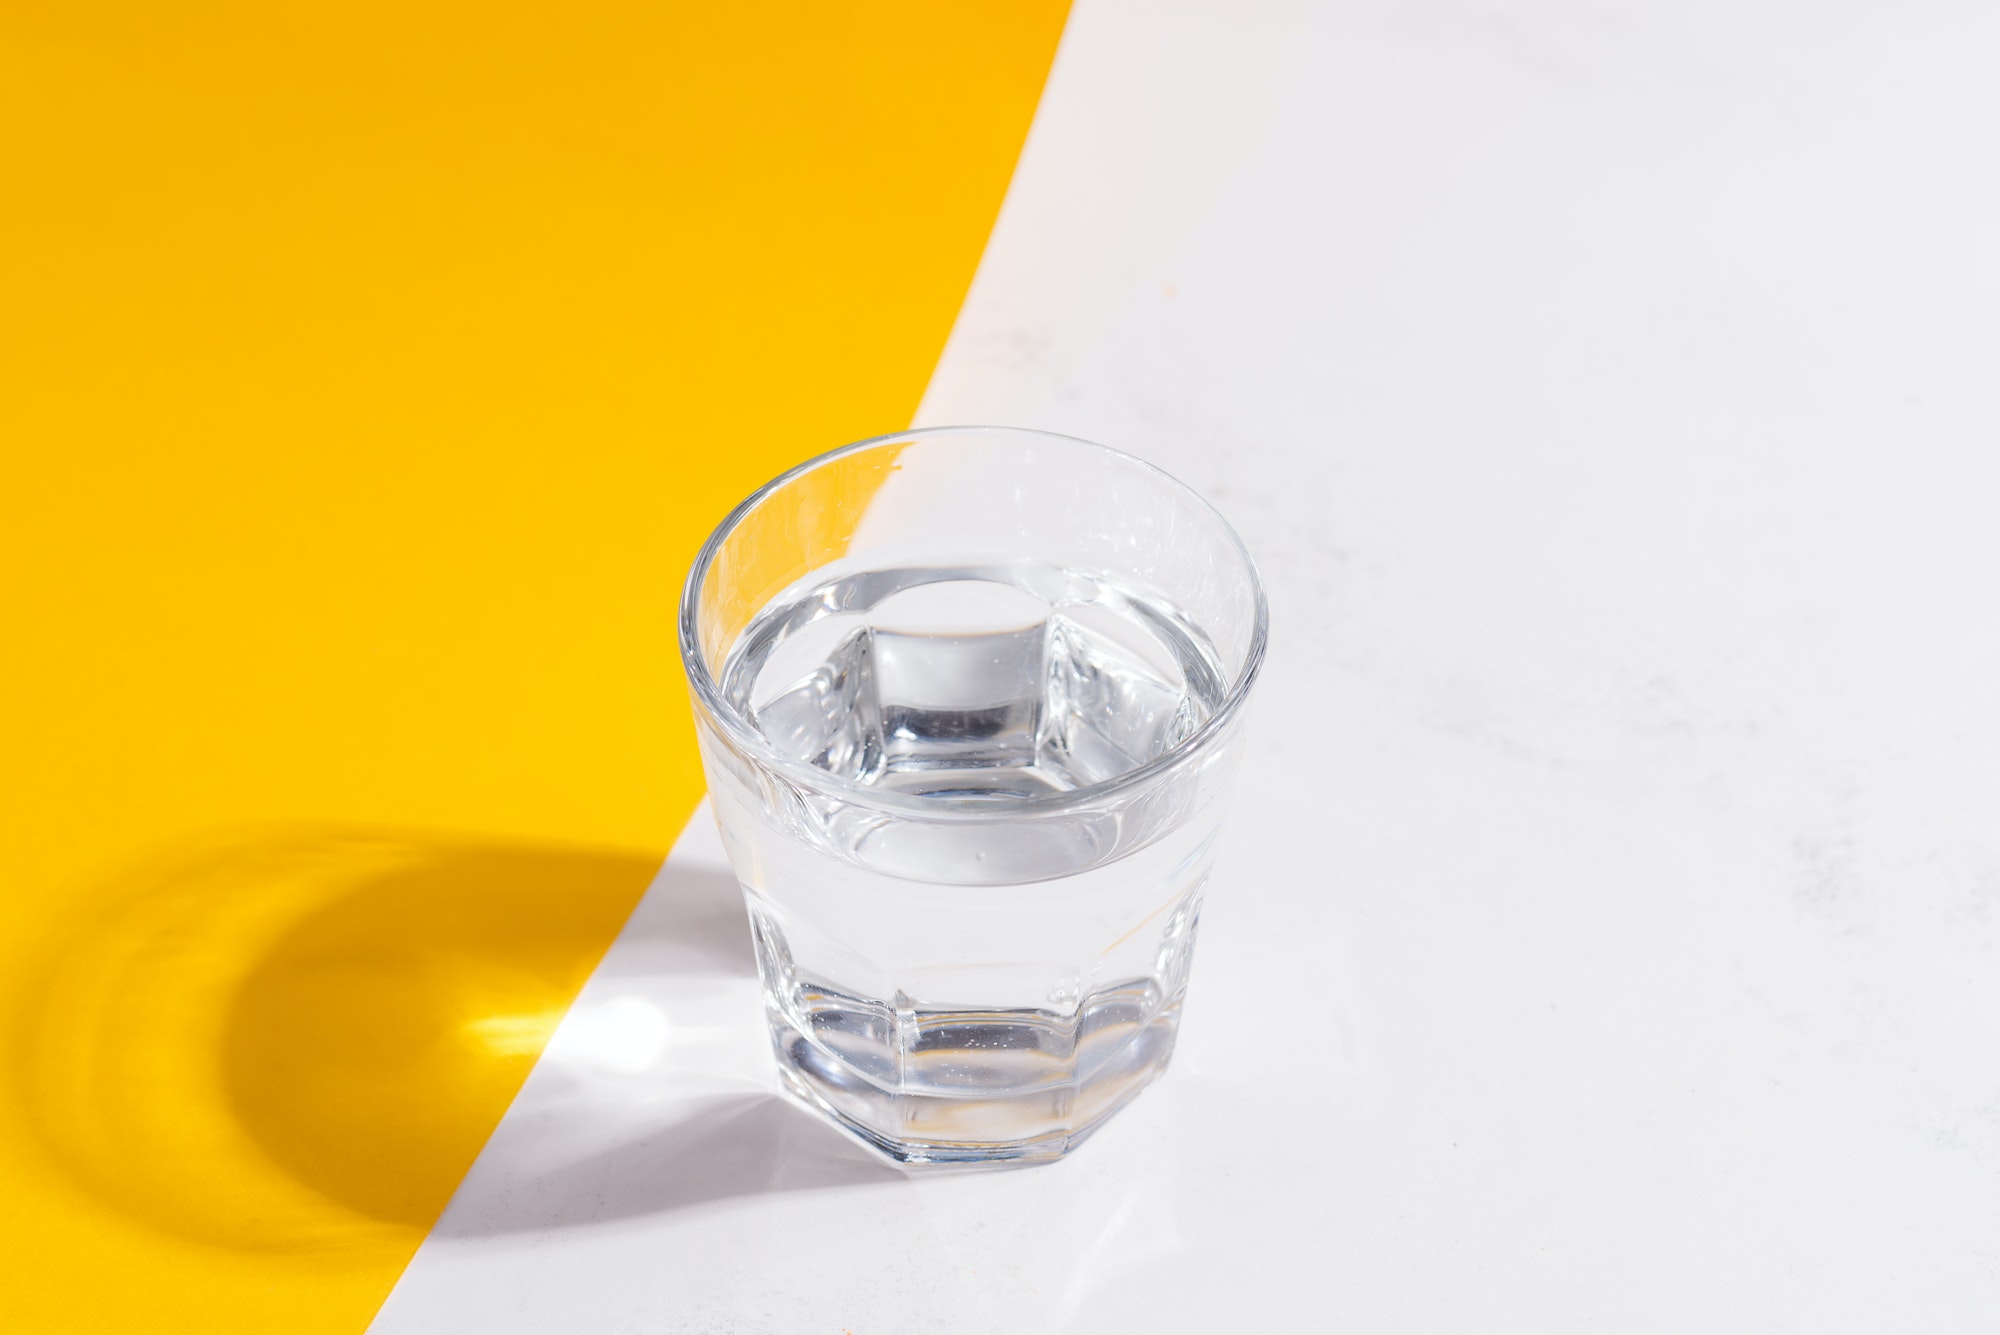 Top view of glass of fresh cold clean water on a duotone yellow white background with soft shadows